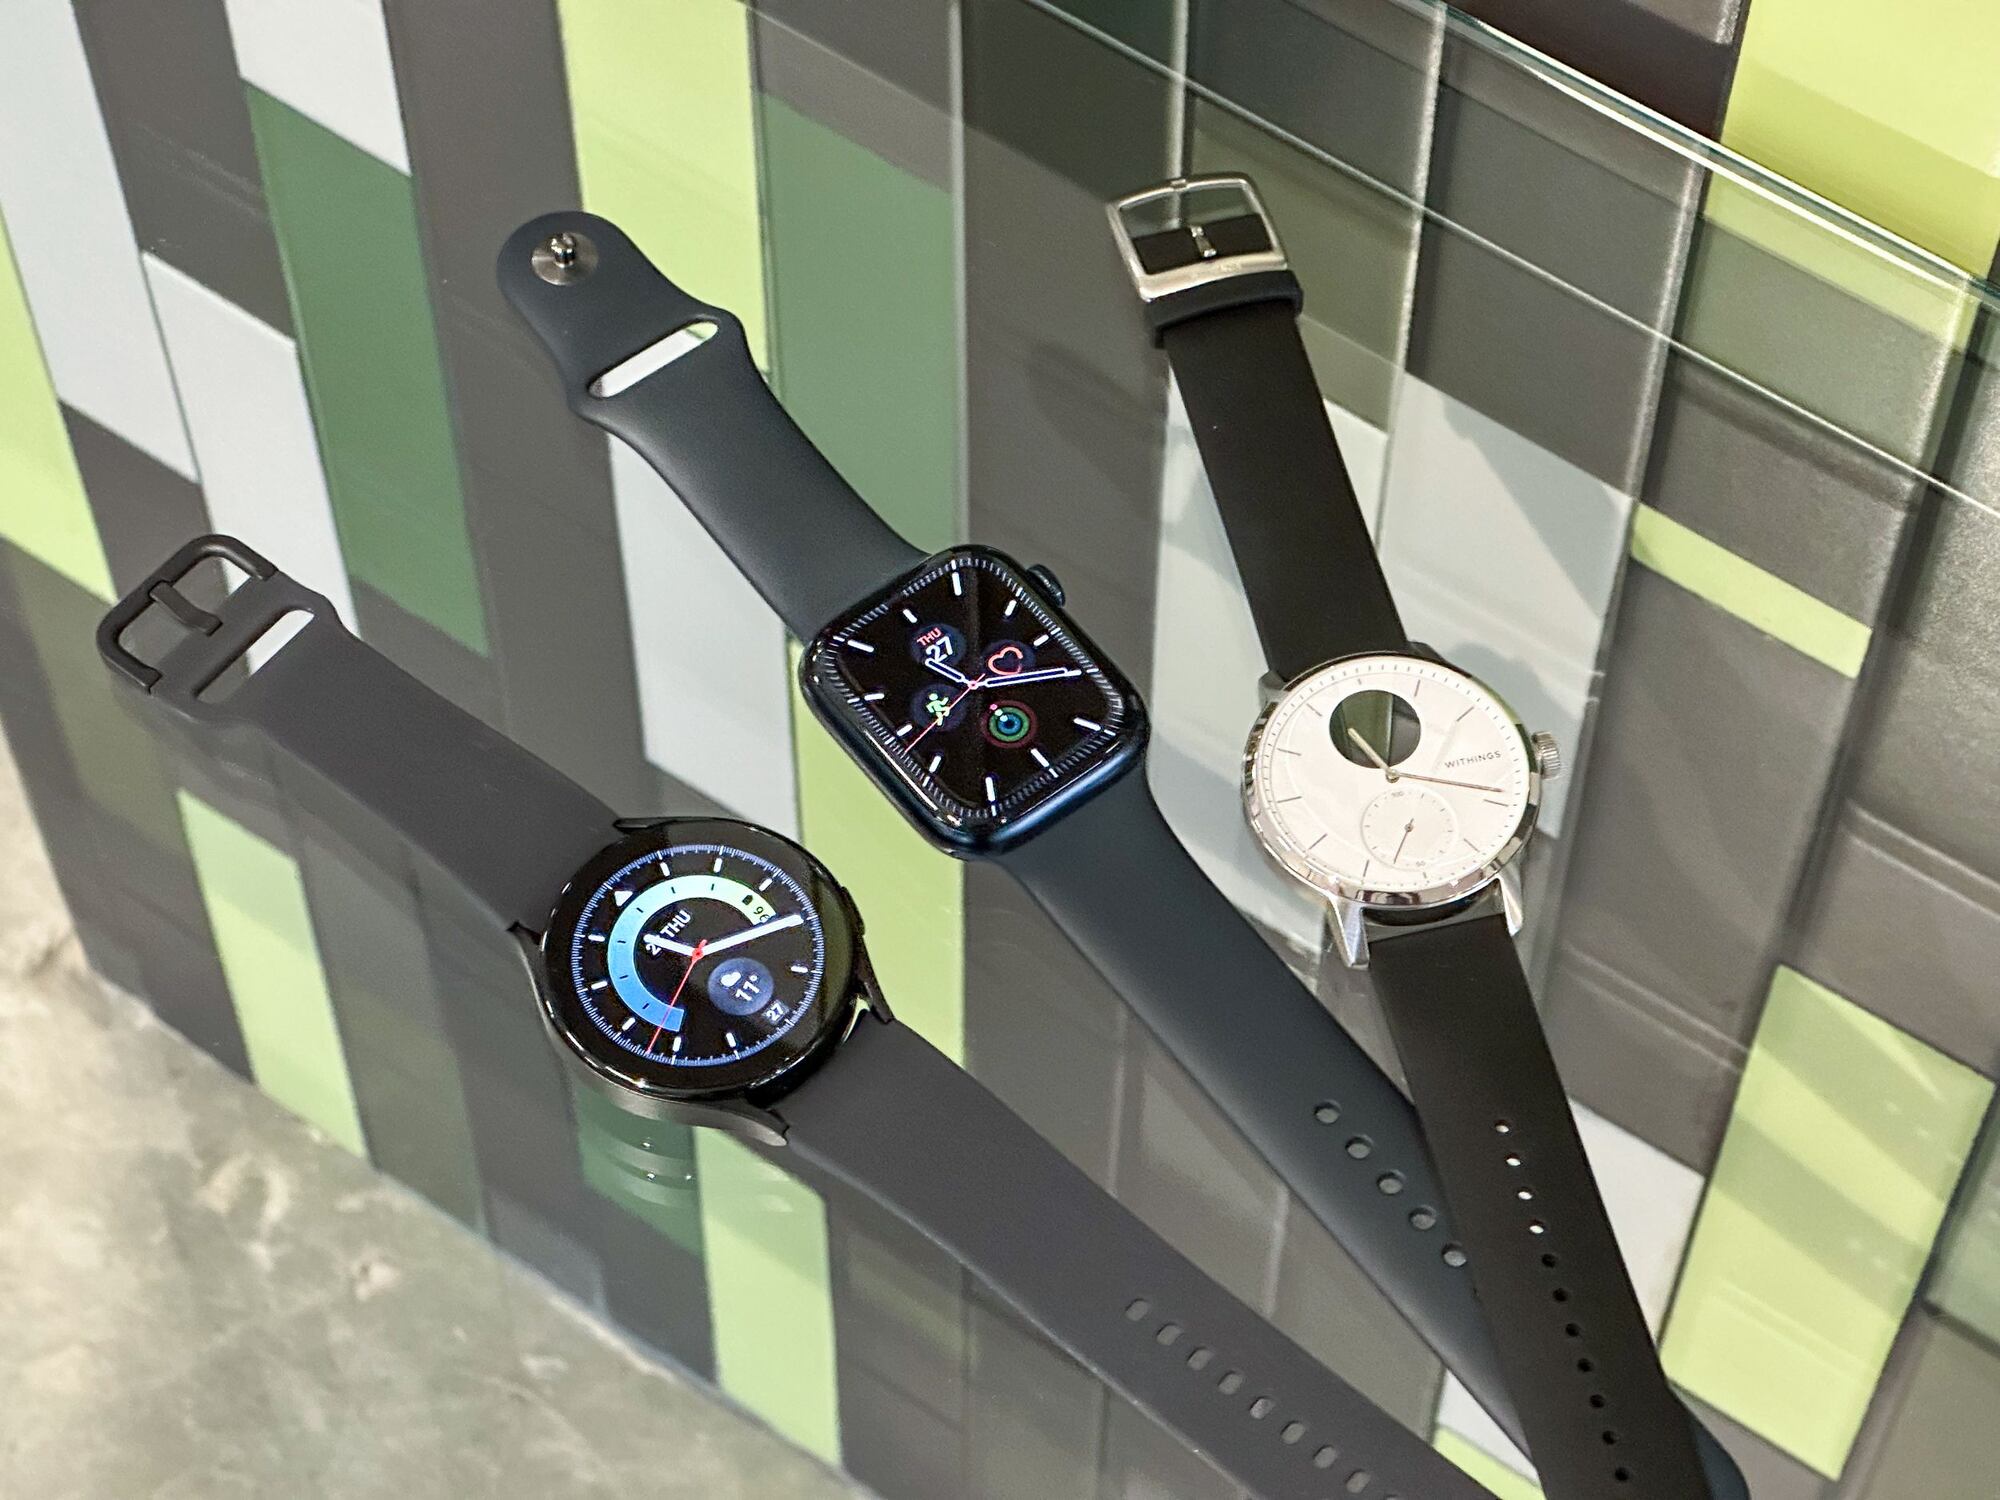 Finding The Right Fit: Smartwatch Wearing Tips